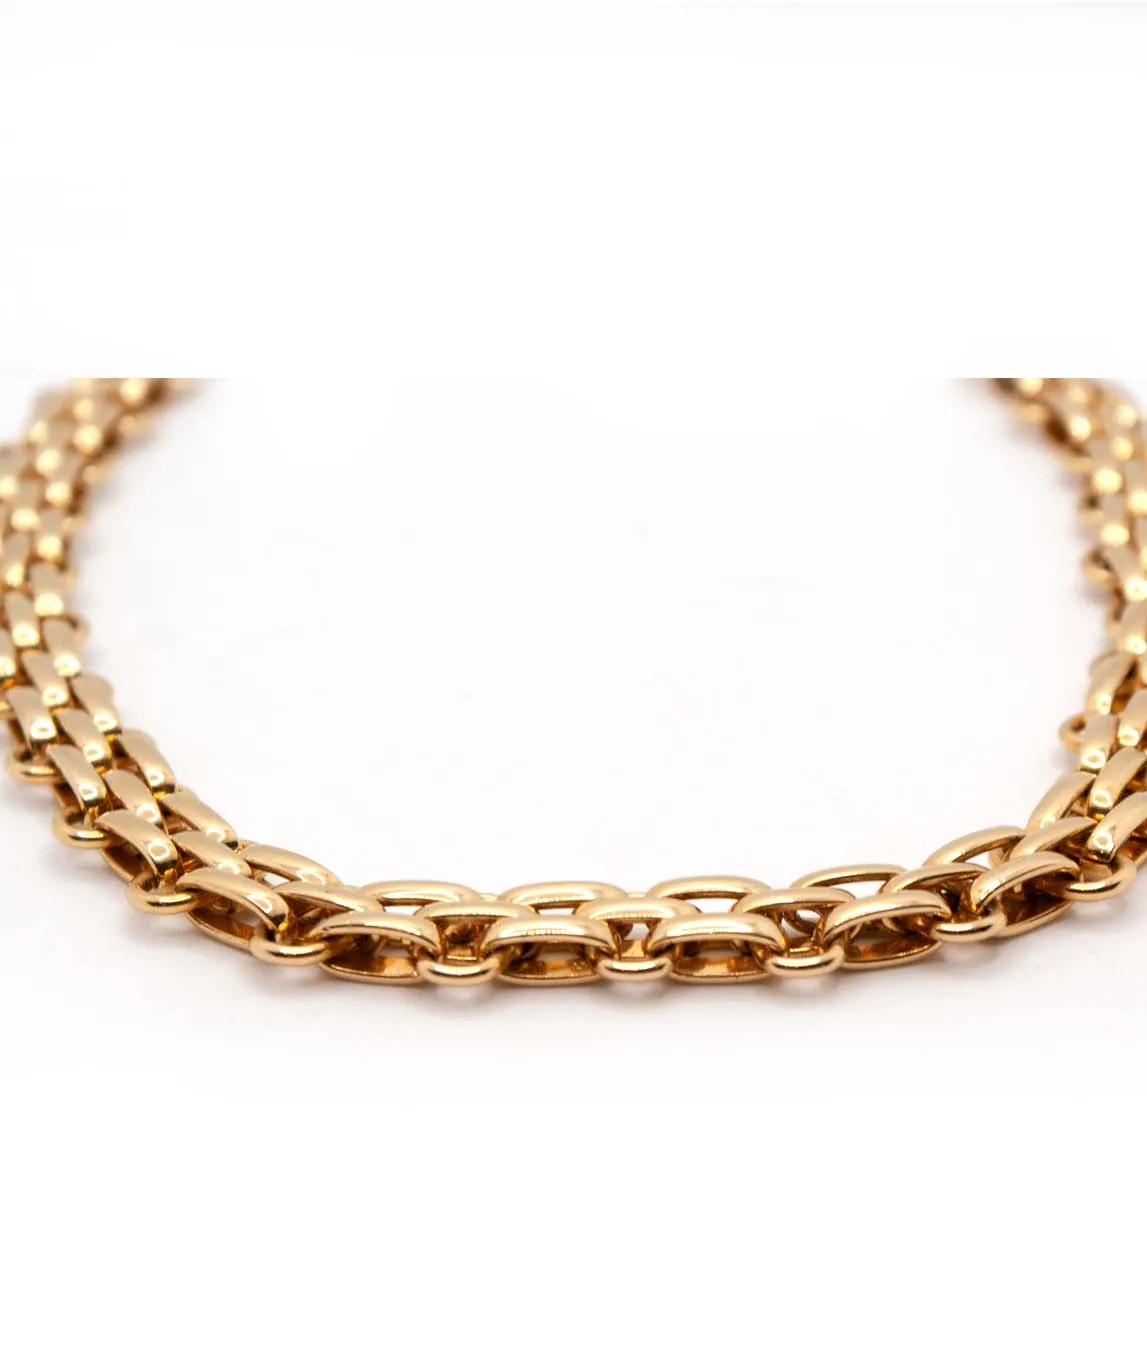 Christian Dior exquisite vintage gold plated choker Paris 1970s Necklace -  Catawiki